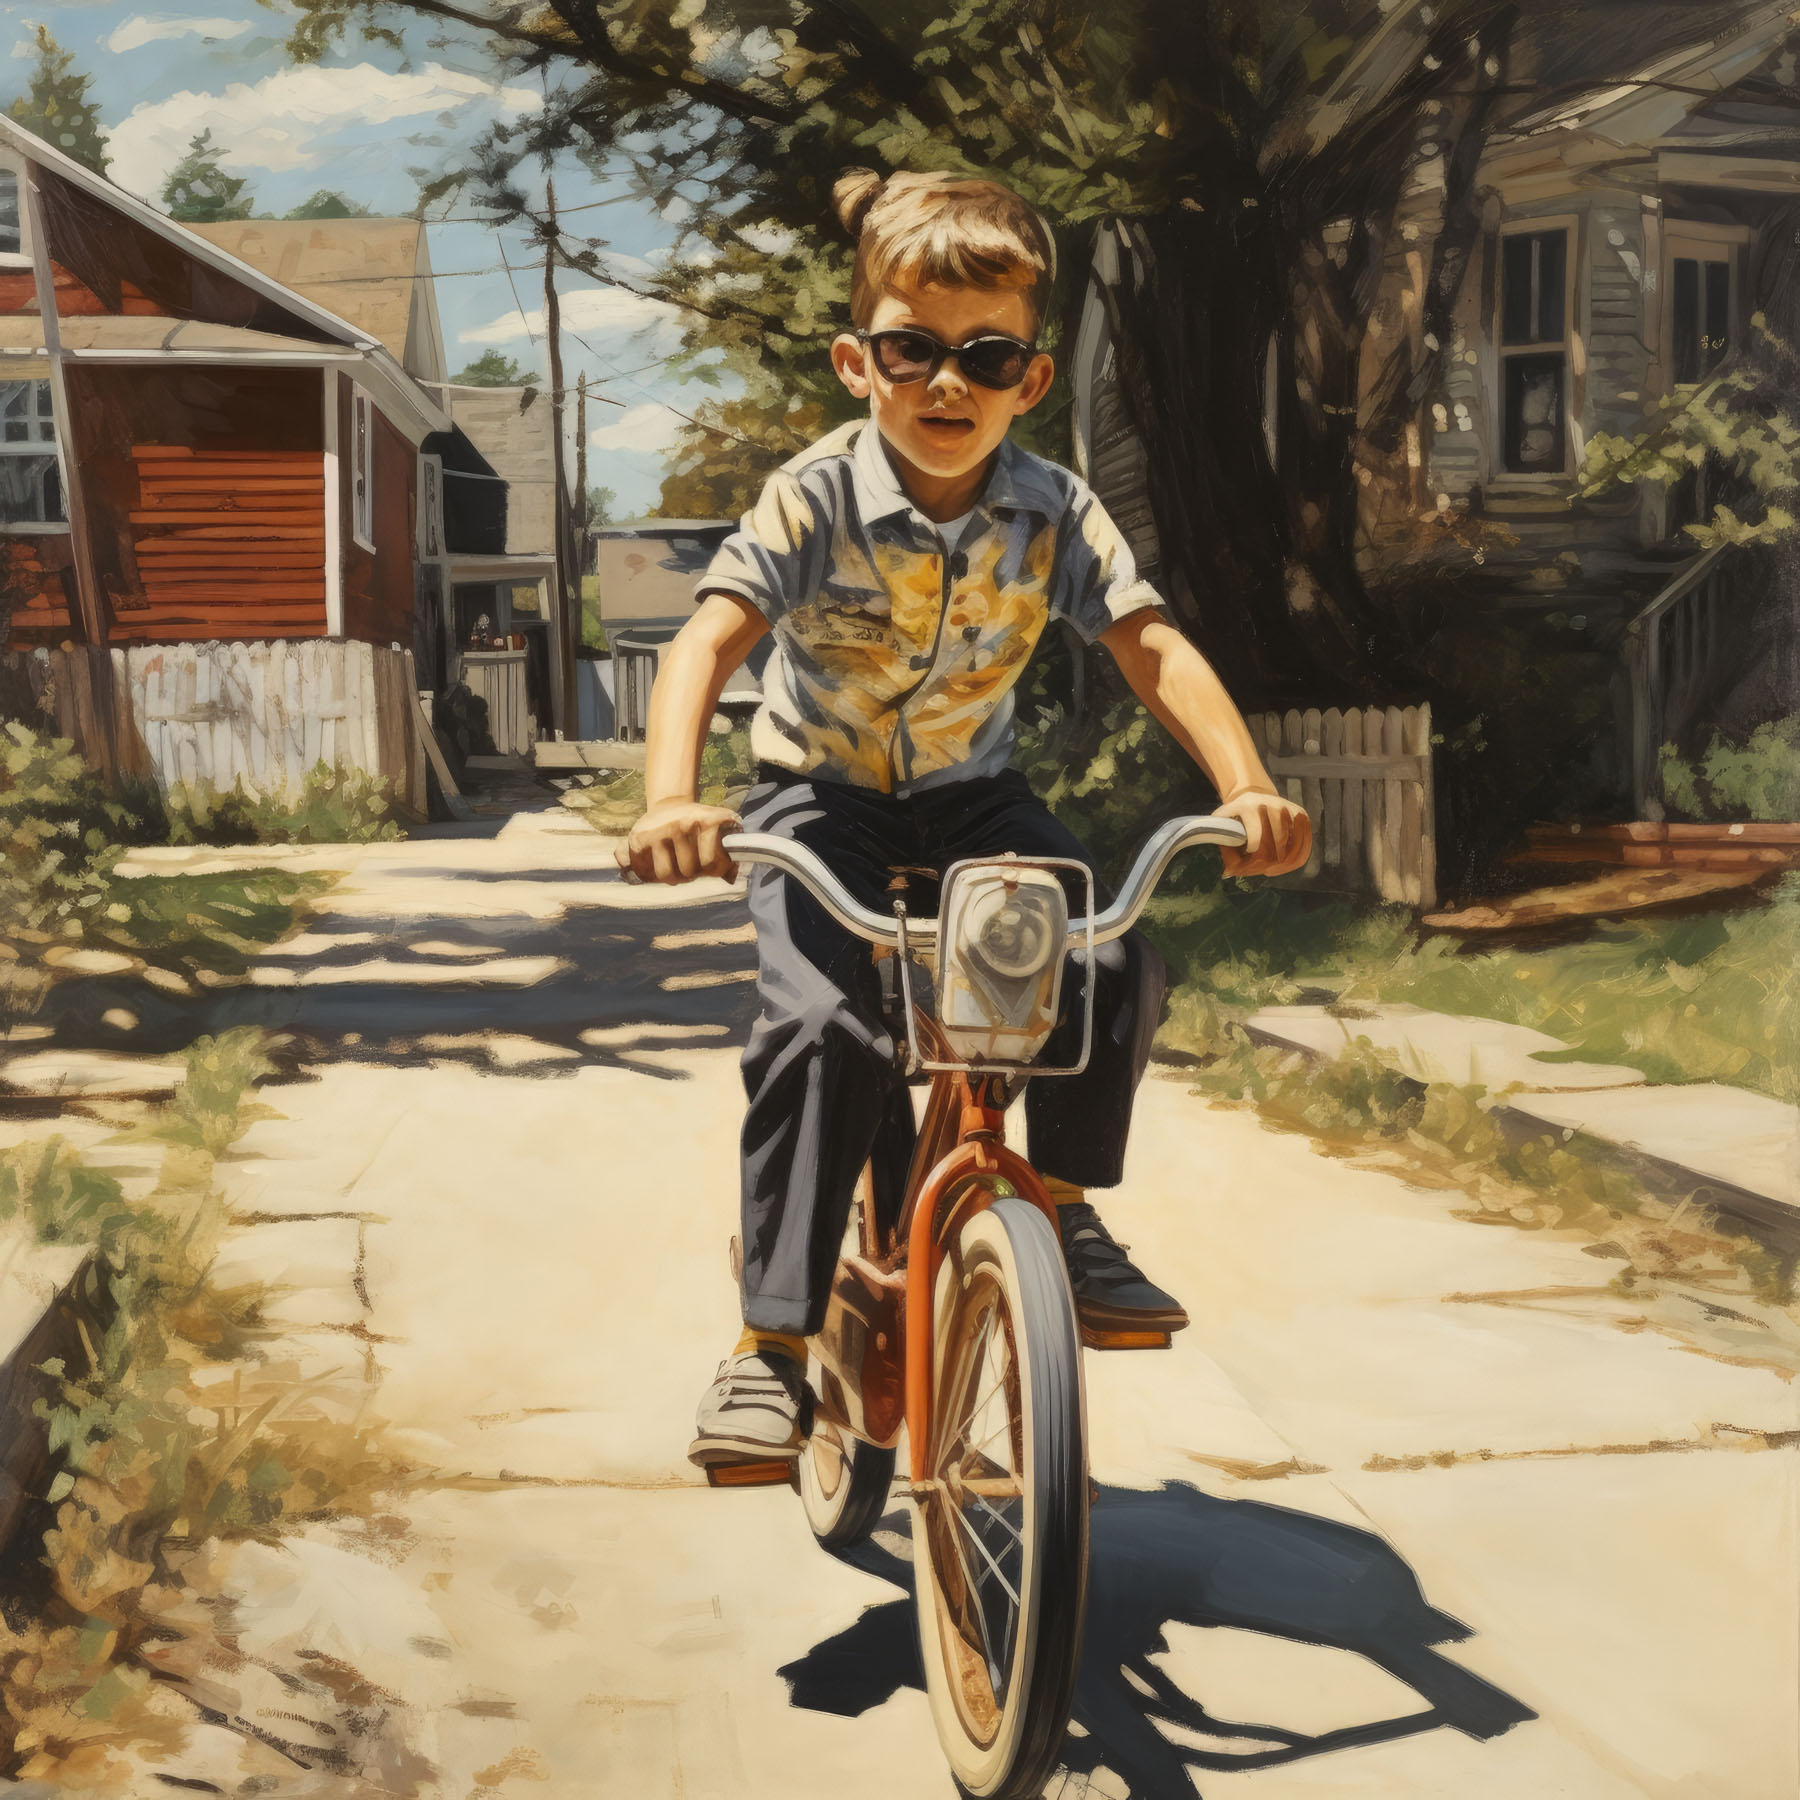 Young boy with sunglasses riding his bicycle through a suburban alley.